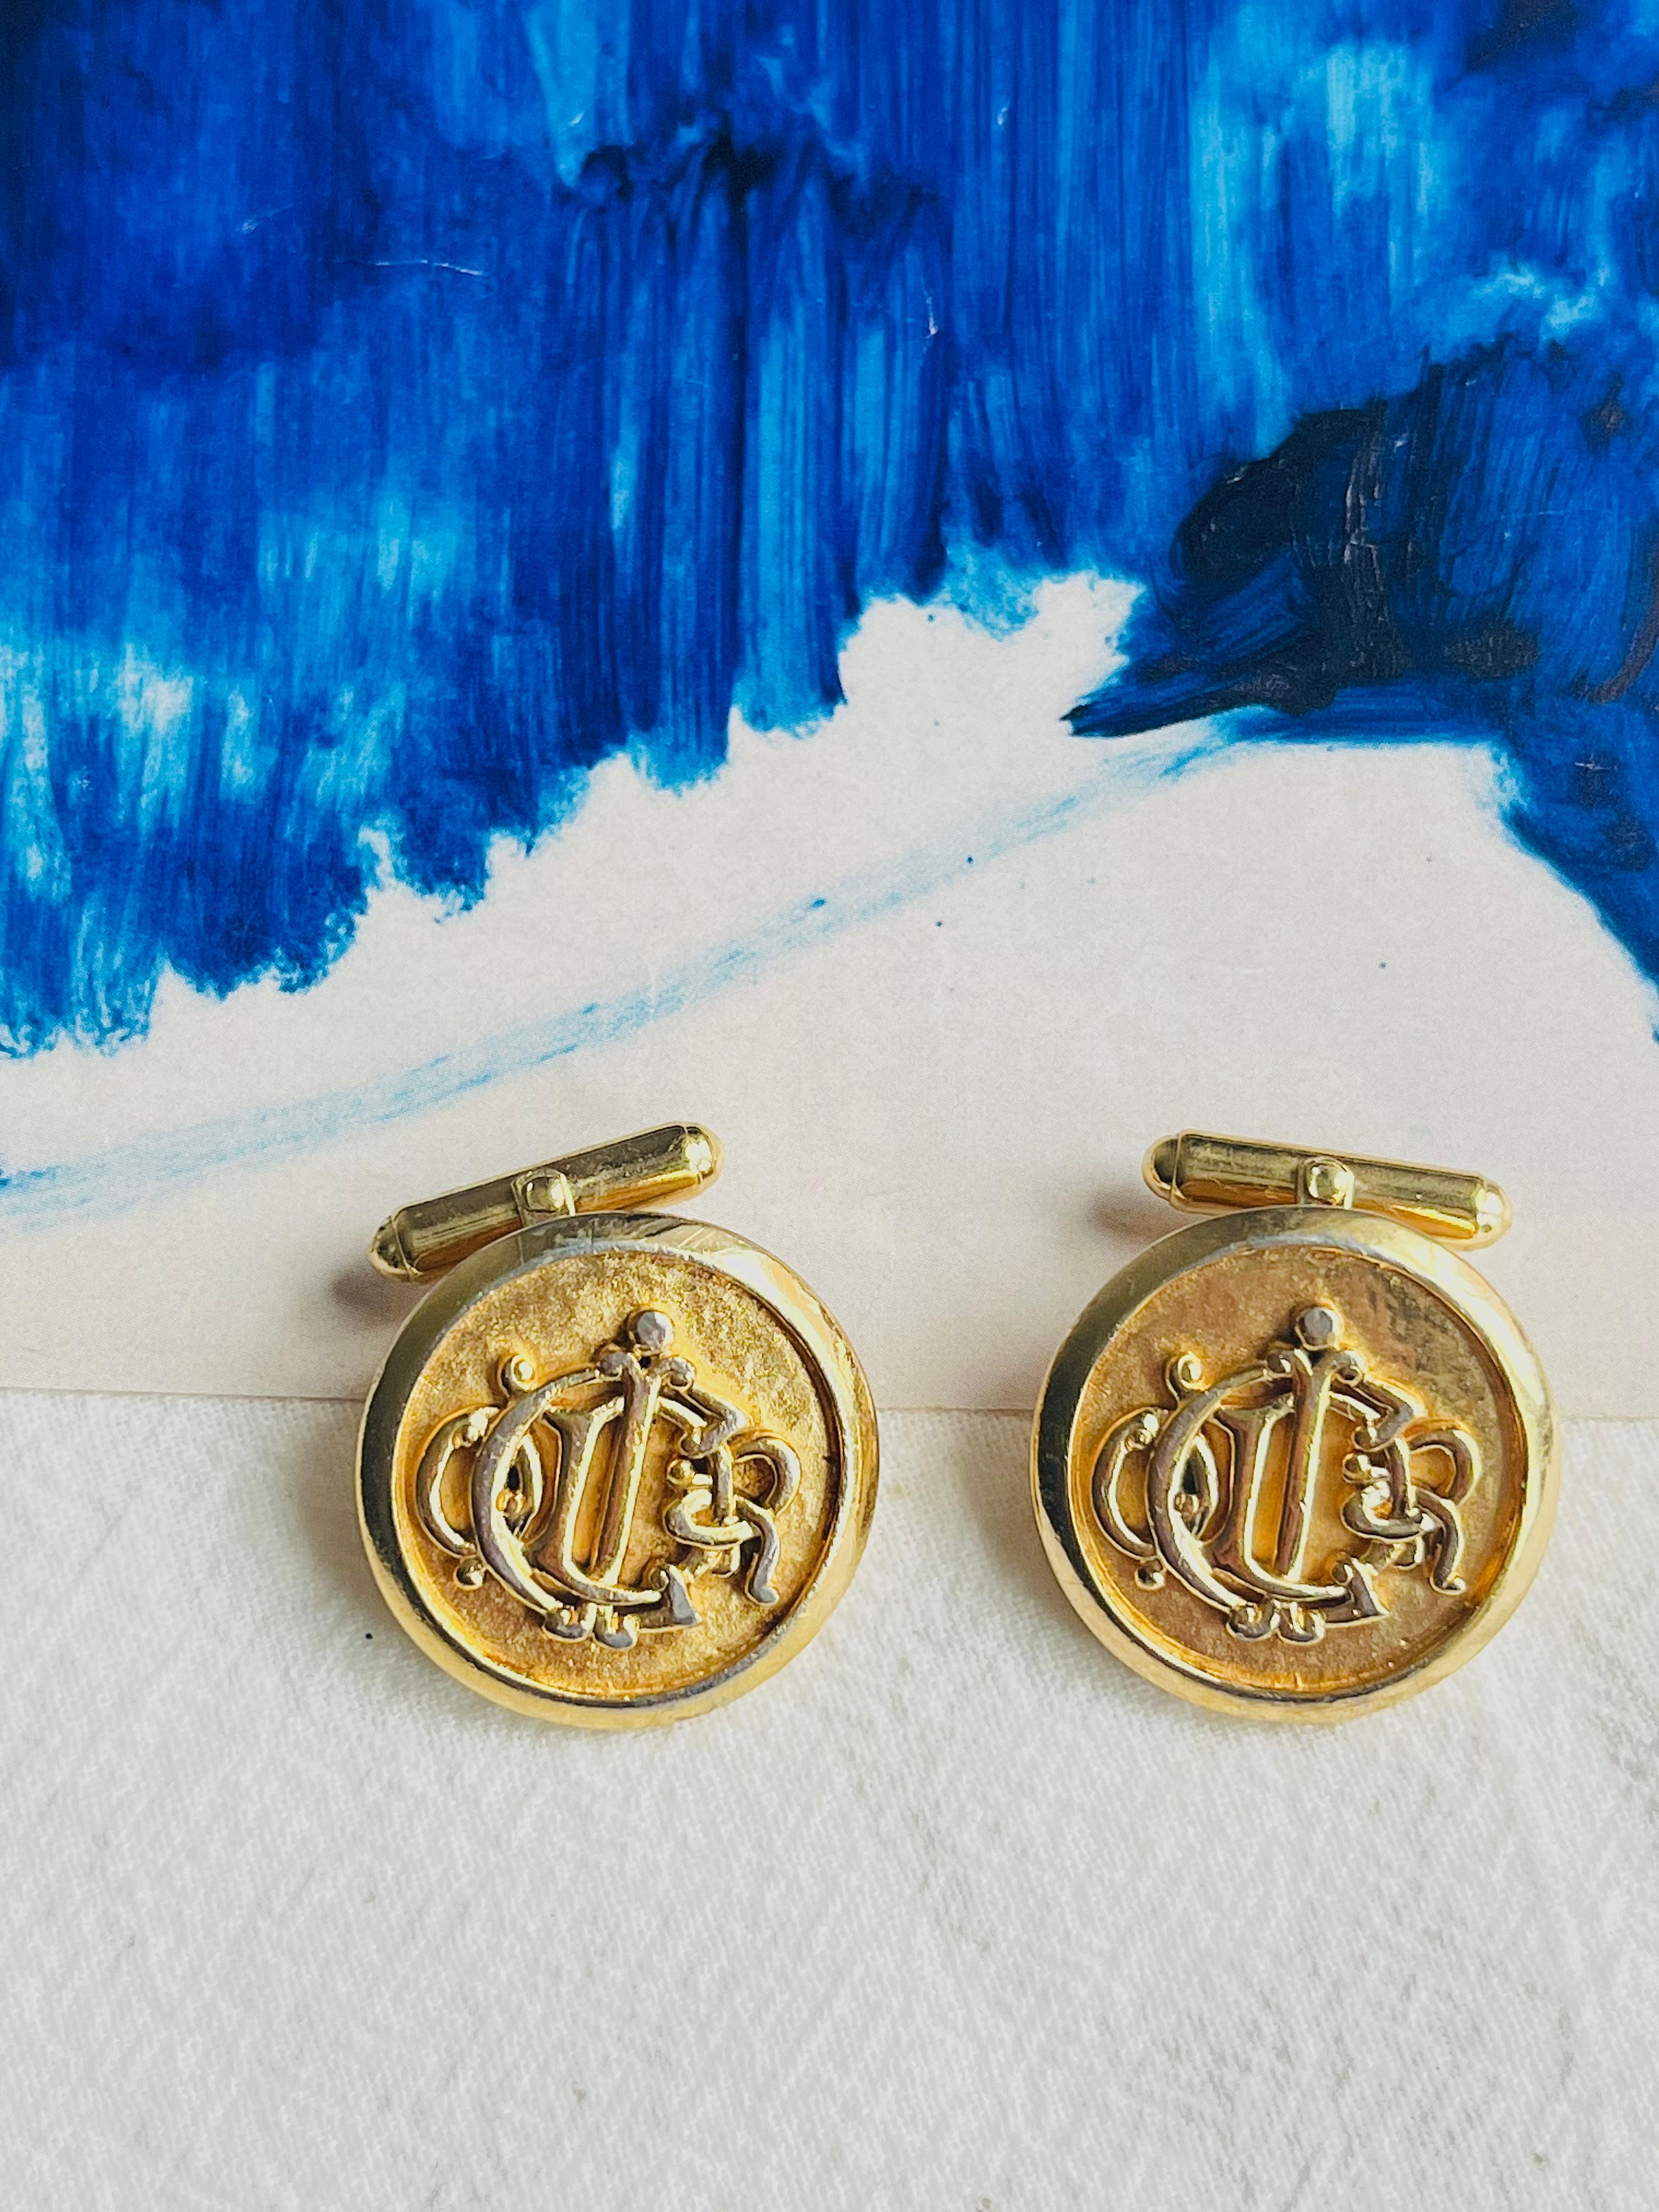 Christian Dior Vintage 1980 Insignia Initial Monogram Logo Circle Cufflinks, Gold Tone

Very good condition. 100% Genuine.

Light scratches or colour loss, bearably noticeable.

Size: 2.5*2.5 cm.

Weight: 10 g/each.

_ _ _

Great for everyday wear.